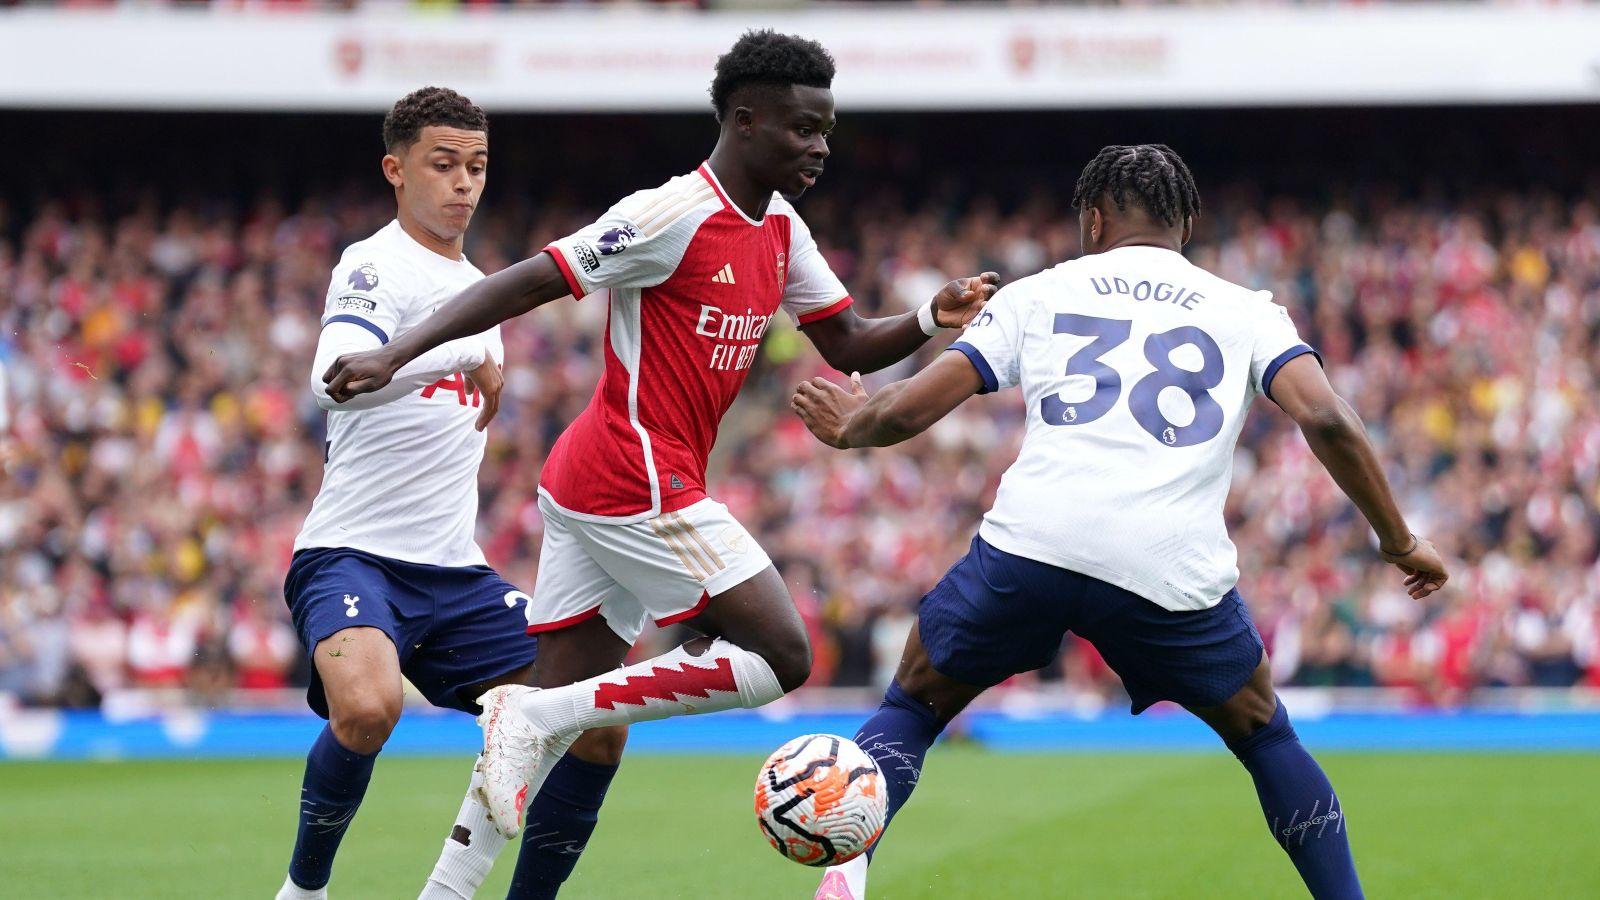 Underwhelming Arsenal drop two points against Tottenham - Just Arsenal News